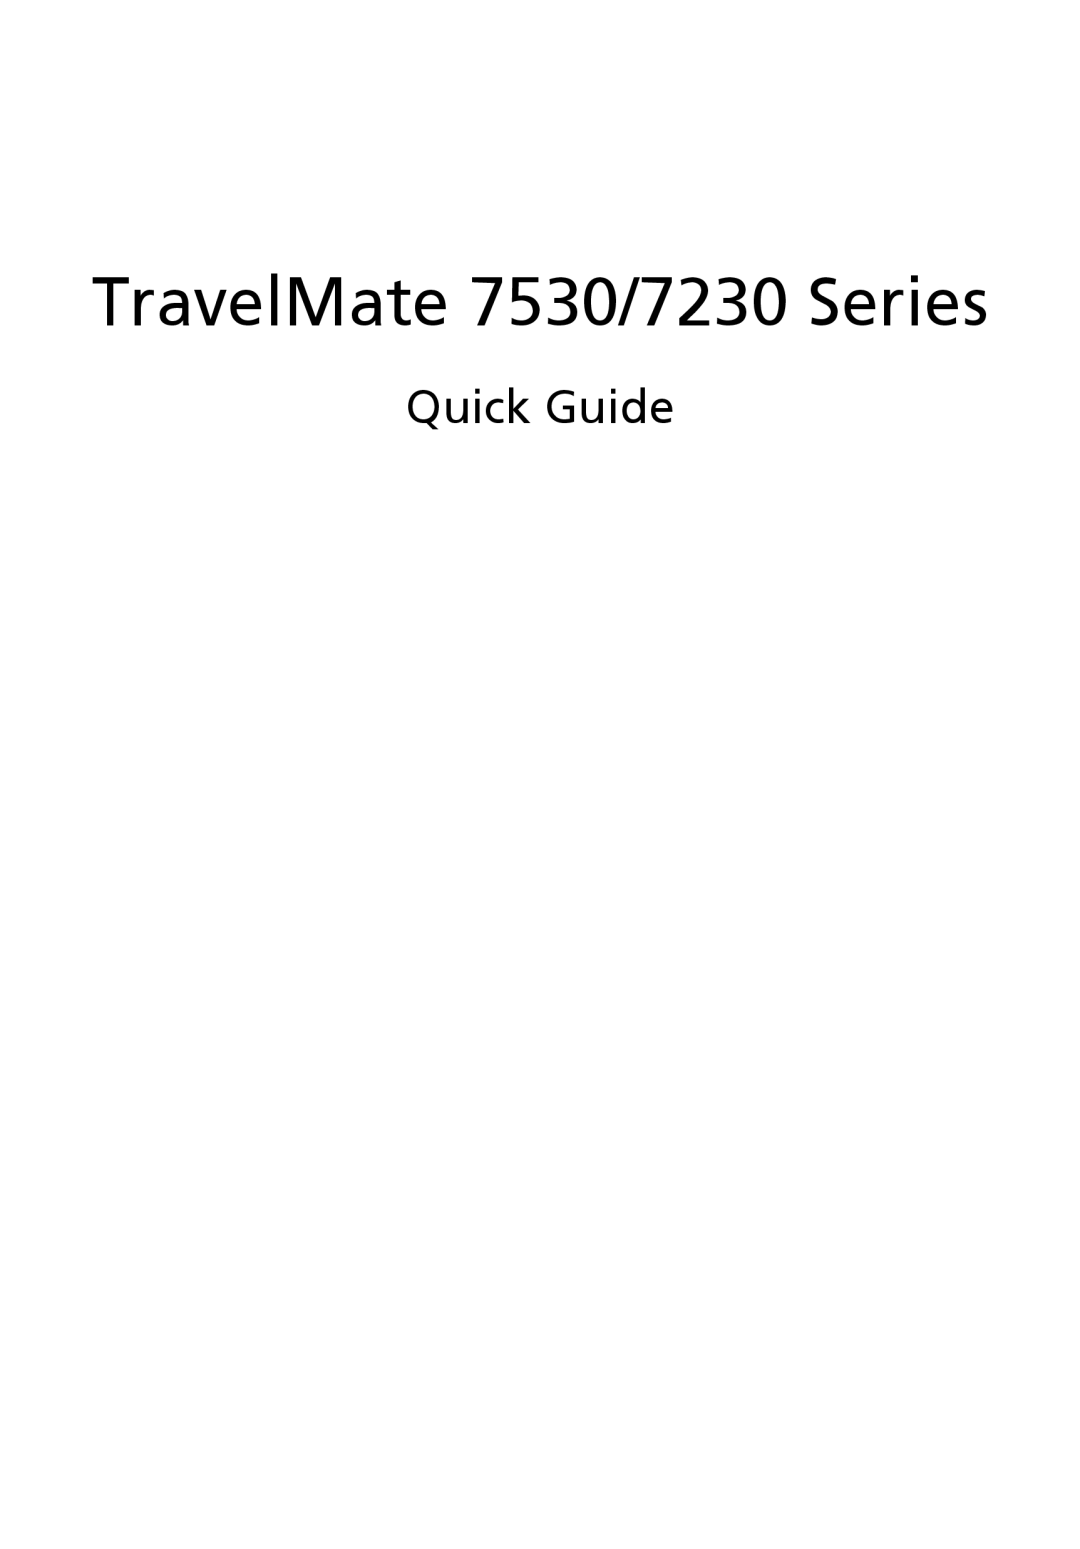 Acer 7530 Series, ZY7 manual Quick Guide, TravelMate 7530/7230 Series 